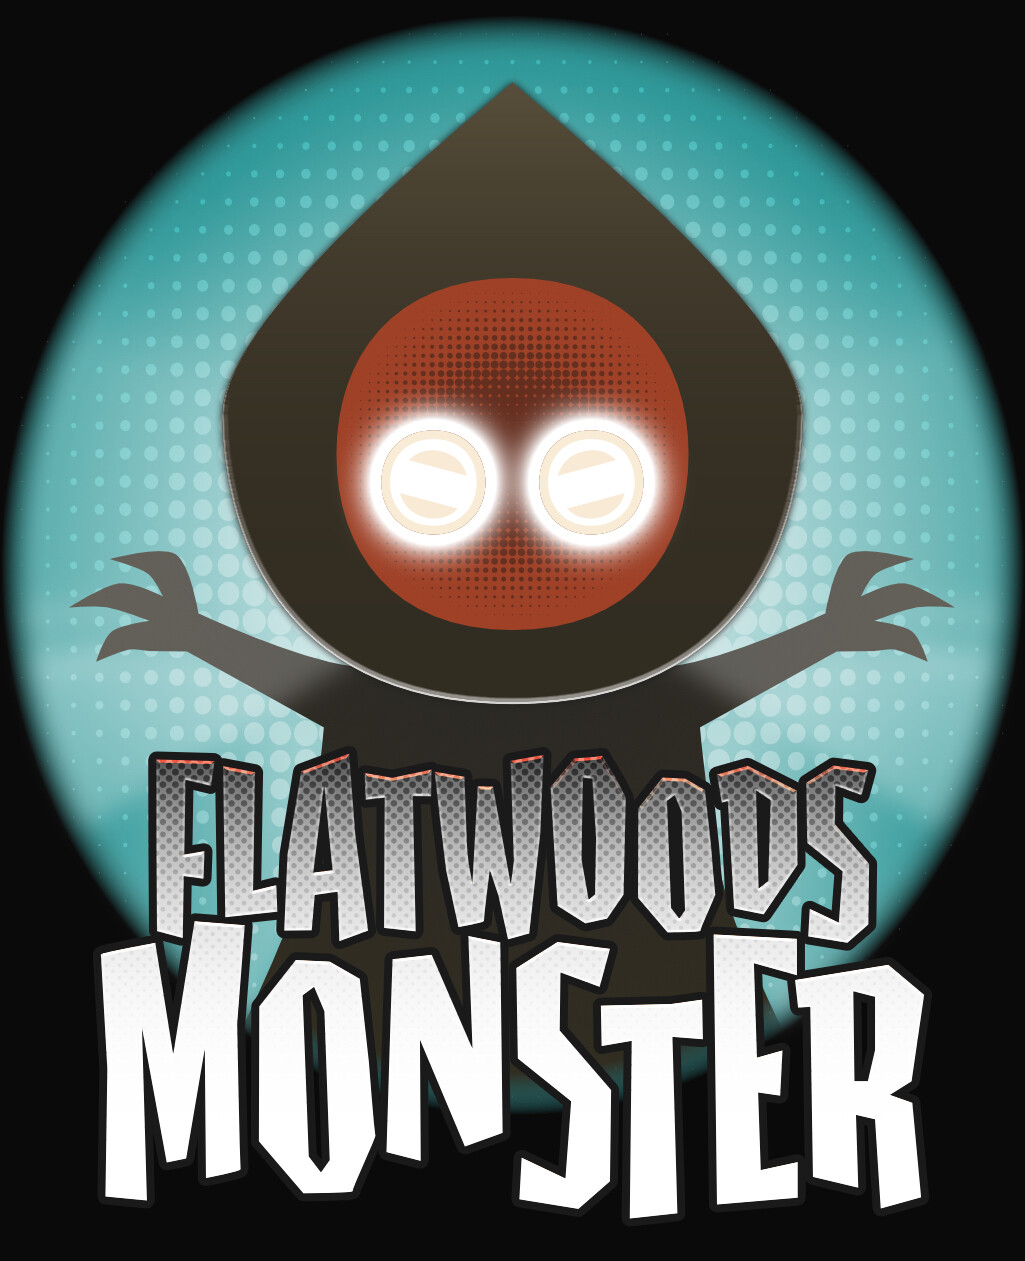 Neato (high-quality t-shirts, large sizes): 
https://www.neatoshop.com/product/Cryptid-Legends-Flatwoods-Monster
TeePublic (affordable shirts and stickers): 
https://www.teepublic.com/t-shirt/36706194-cryptid-legends-flatwoods-monster?store_id=2013963